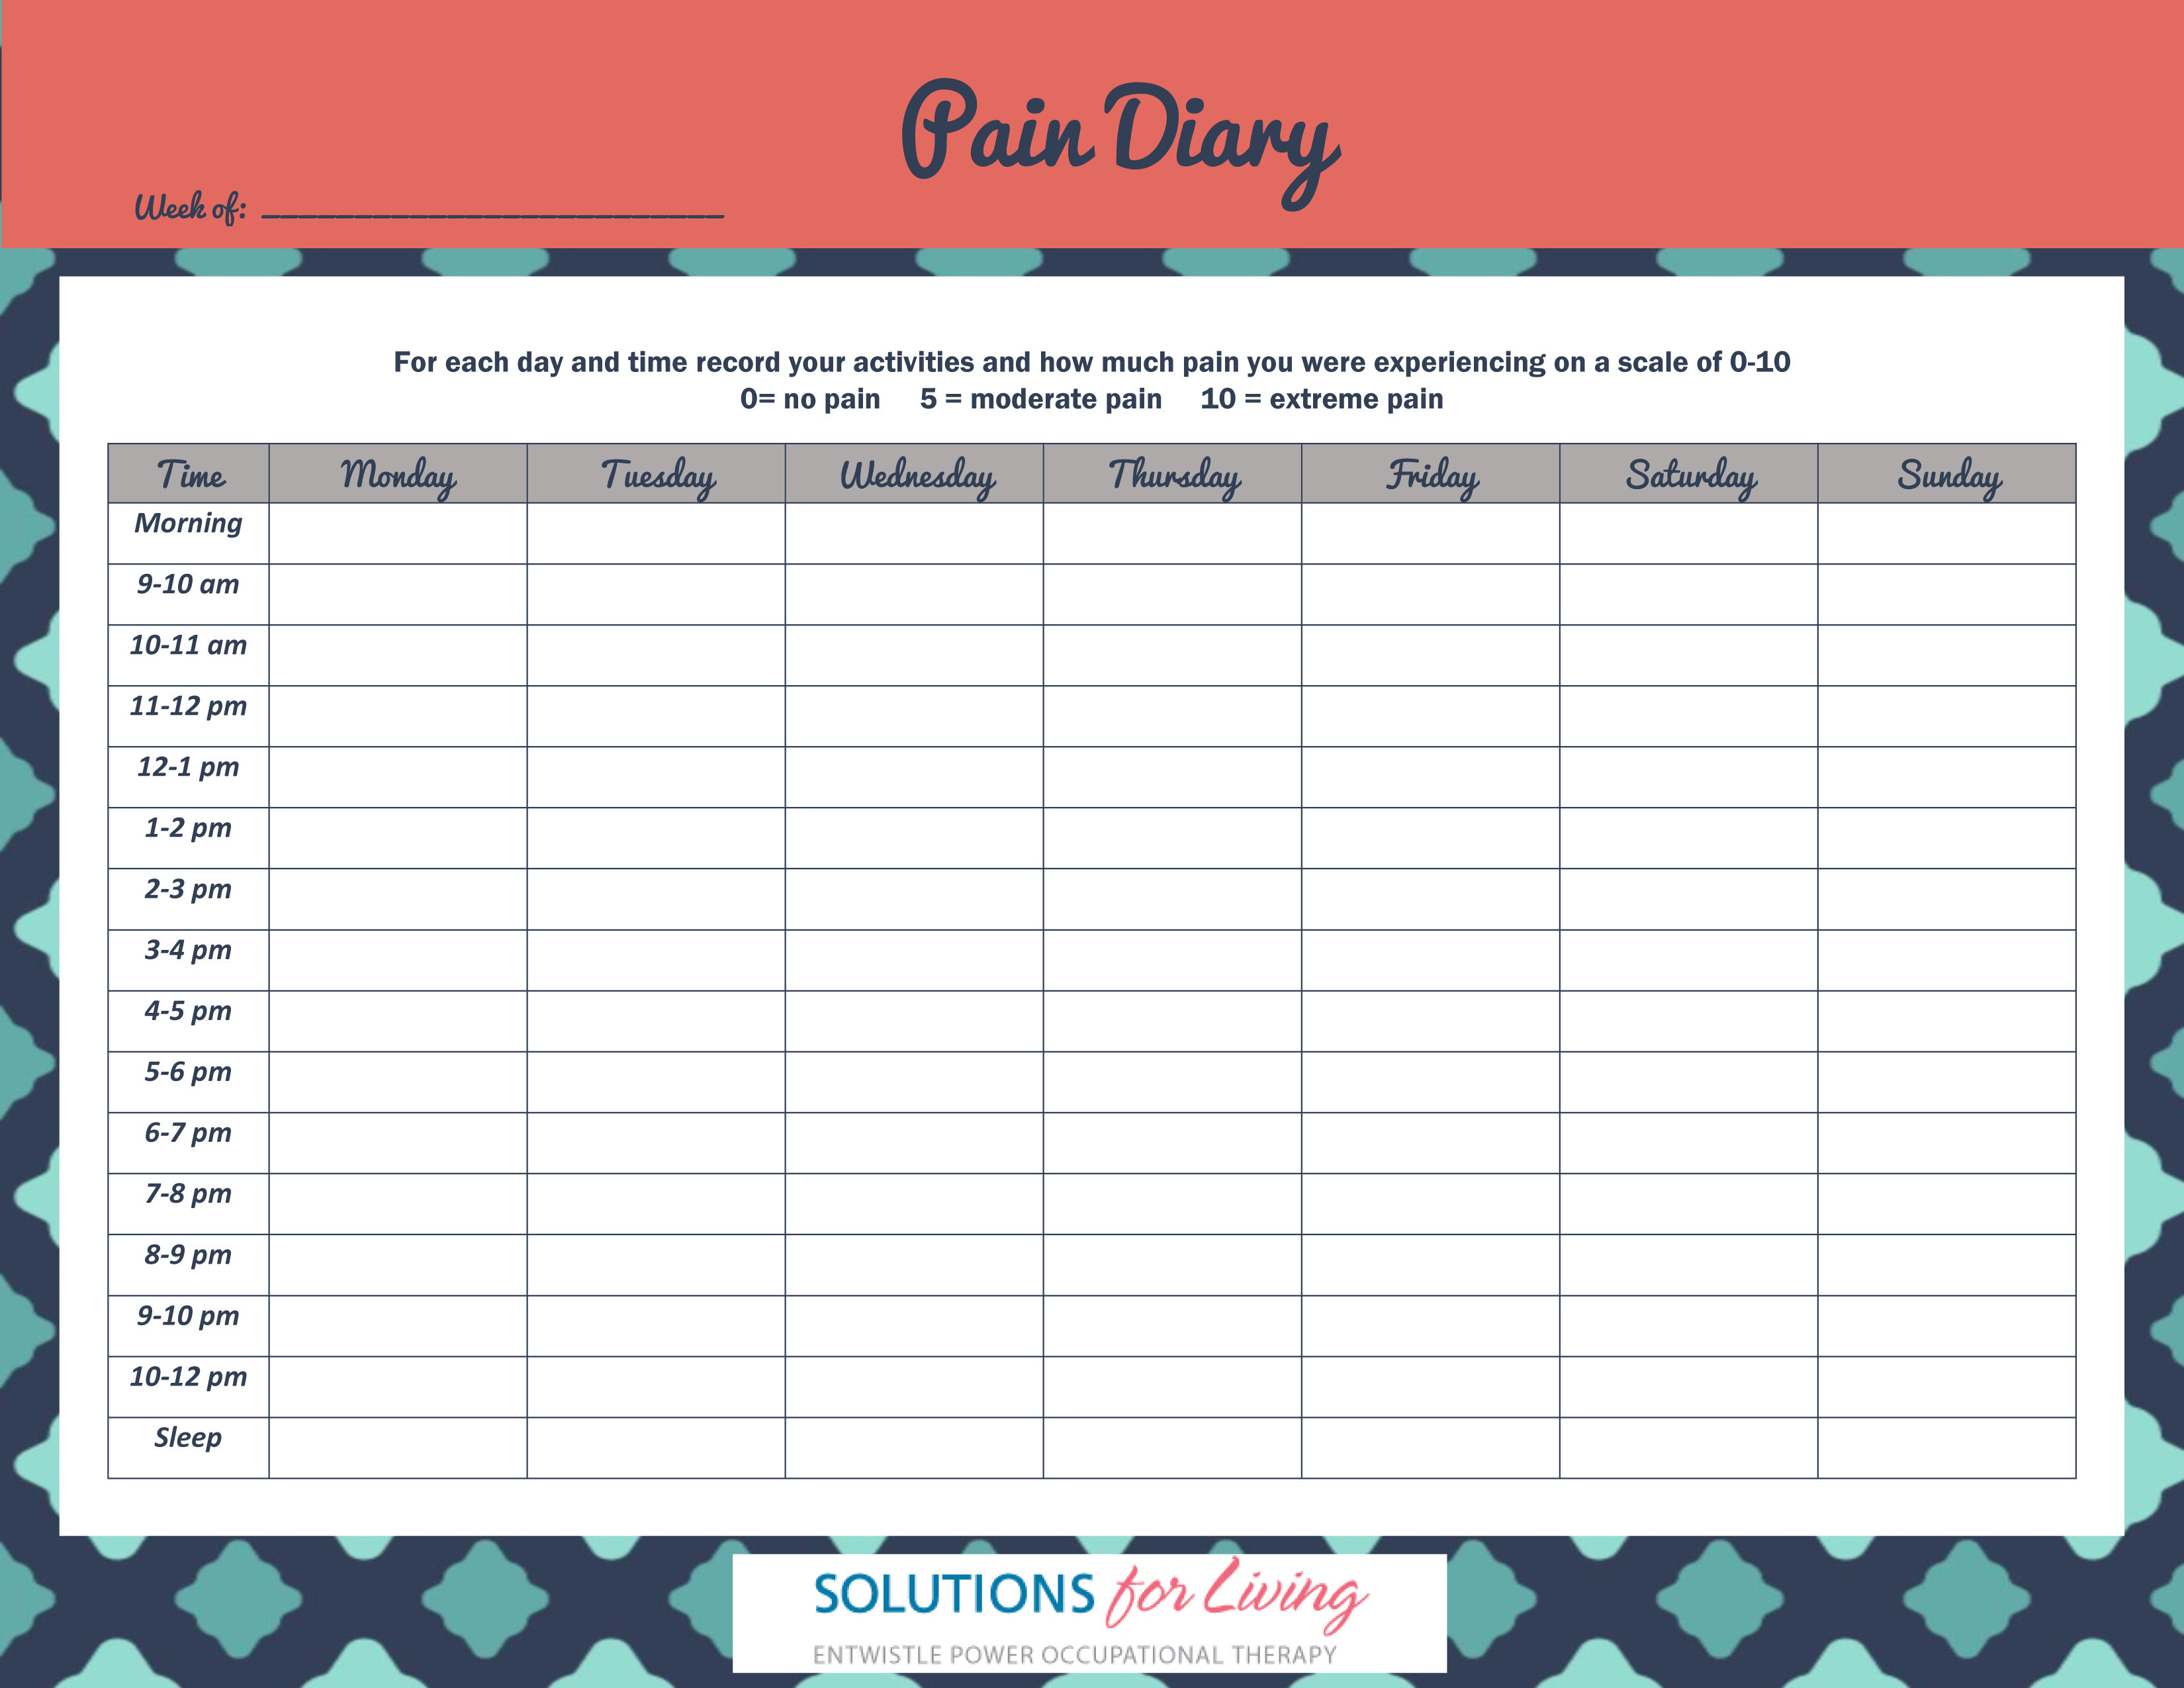 Pain Diary SOLUTIONS FOR LIVING